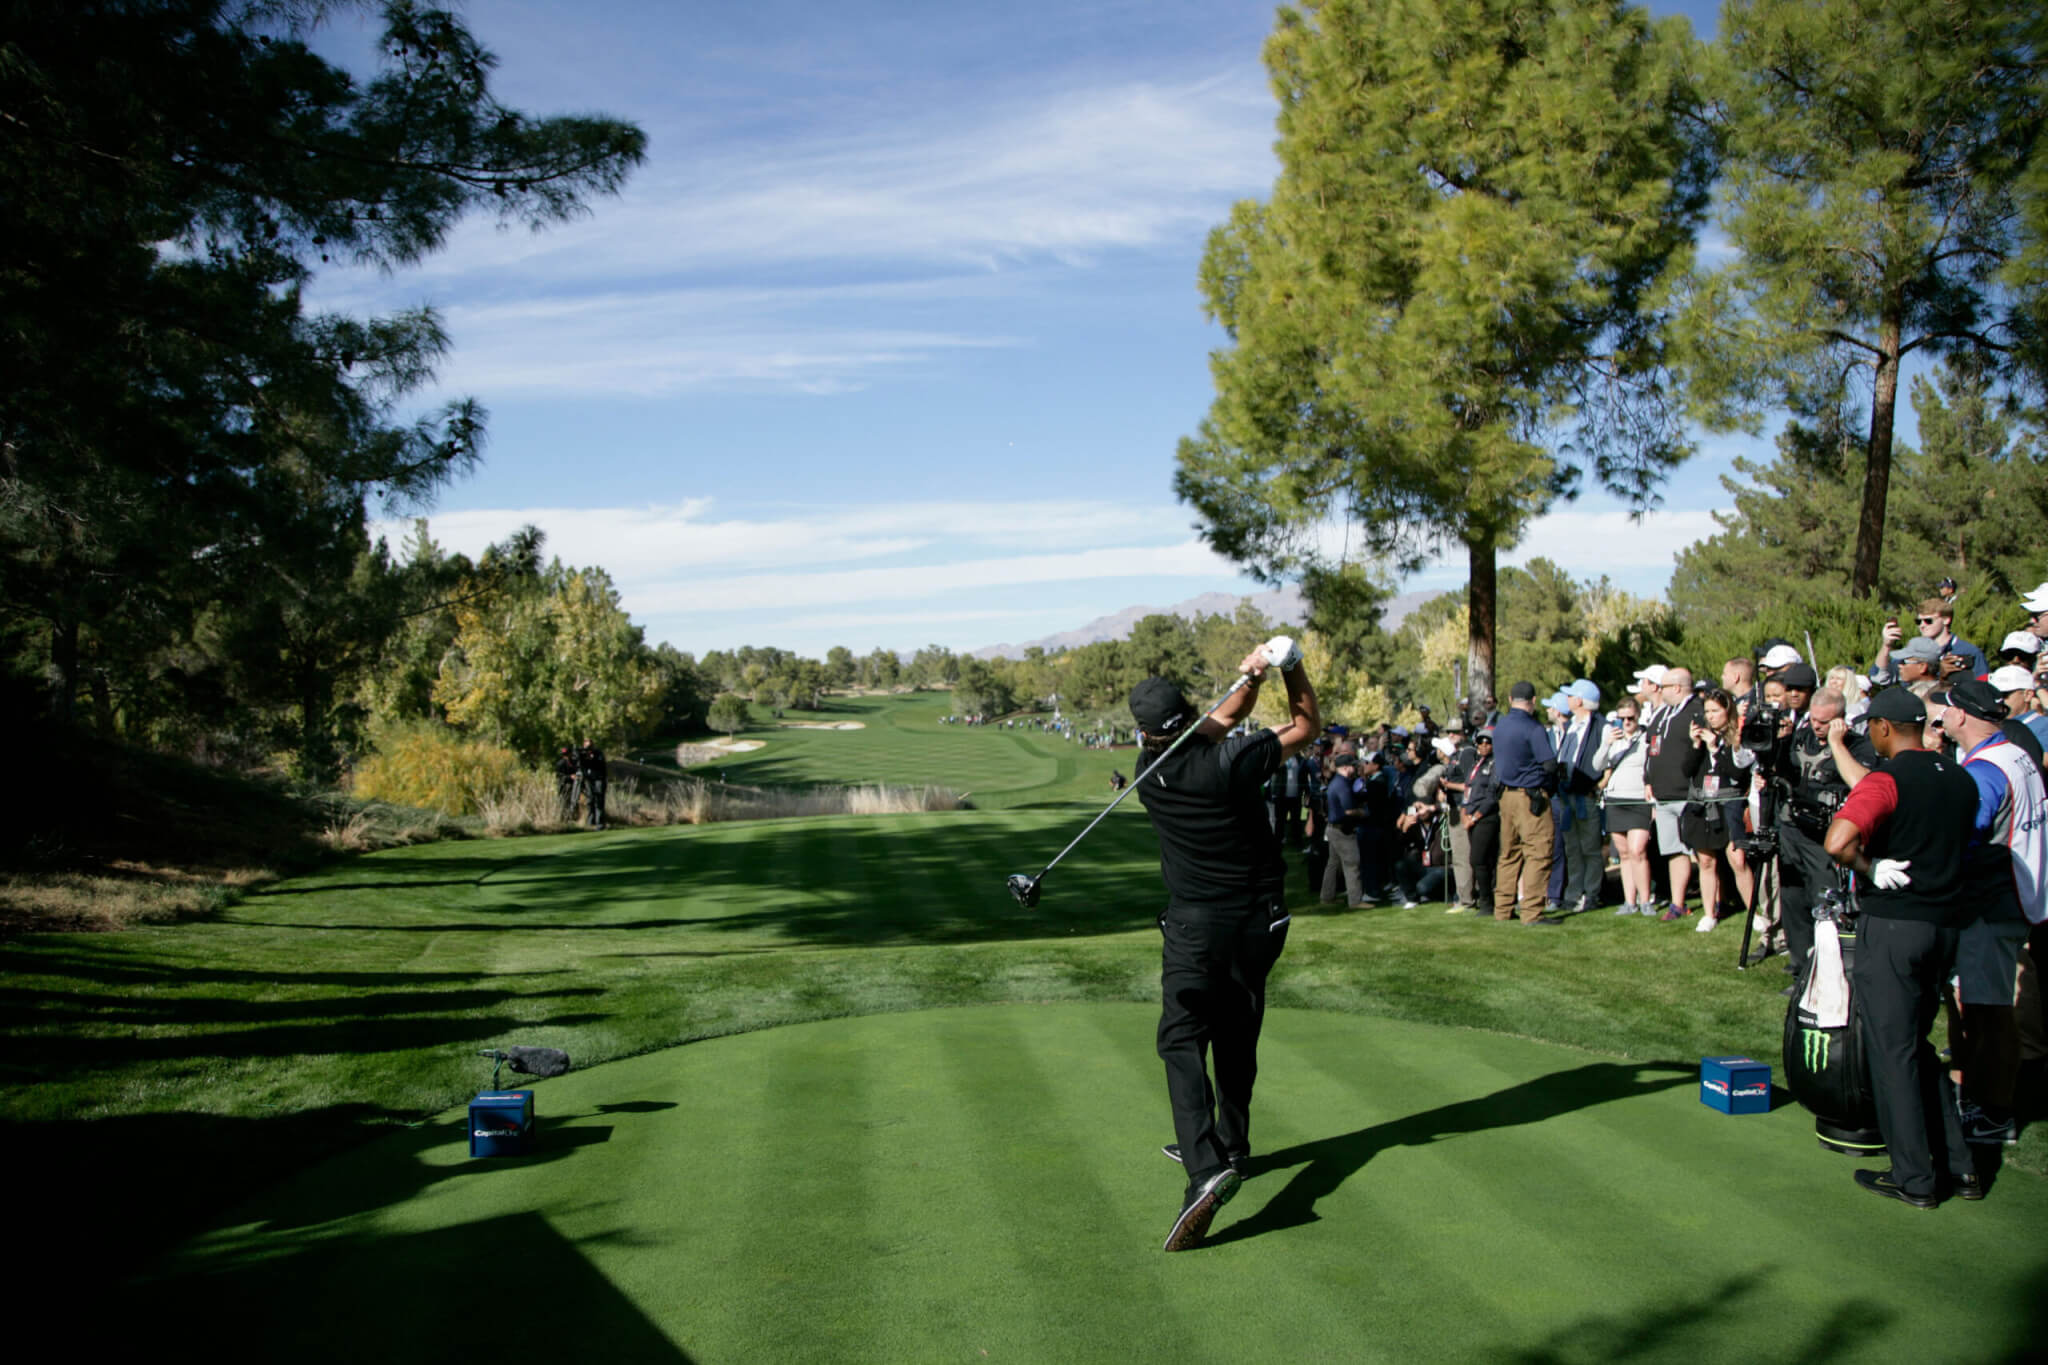 Phil Mickelson tees off at the third hole of his pay-per-view winner-take-all $9 Million dollar golf match against longtime rival Tiger Woods at Shadow Creek Golf Course in Las Vegas, Nevada on November 23, 2018.